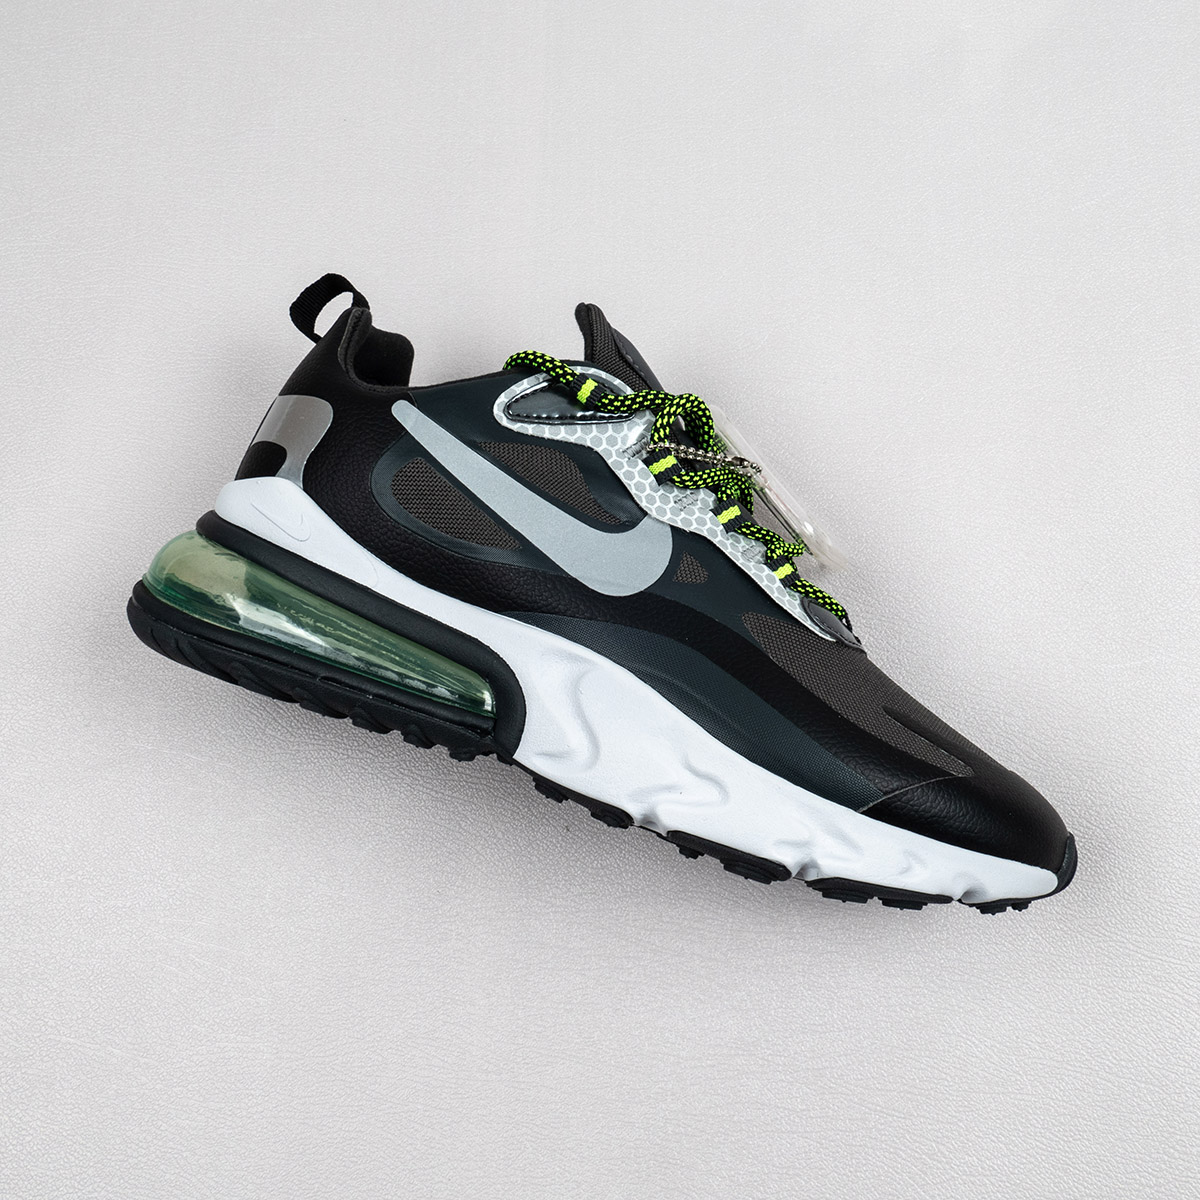 mouw volgens Deskundige nike sole air woven shoe rack for sale philippines - 3M x red yellow green  nike sole air max price in india React SE 'Black Reflective Silver' CT1647  - 001 – HotelomegaShops